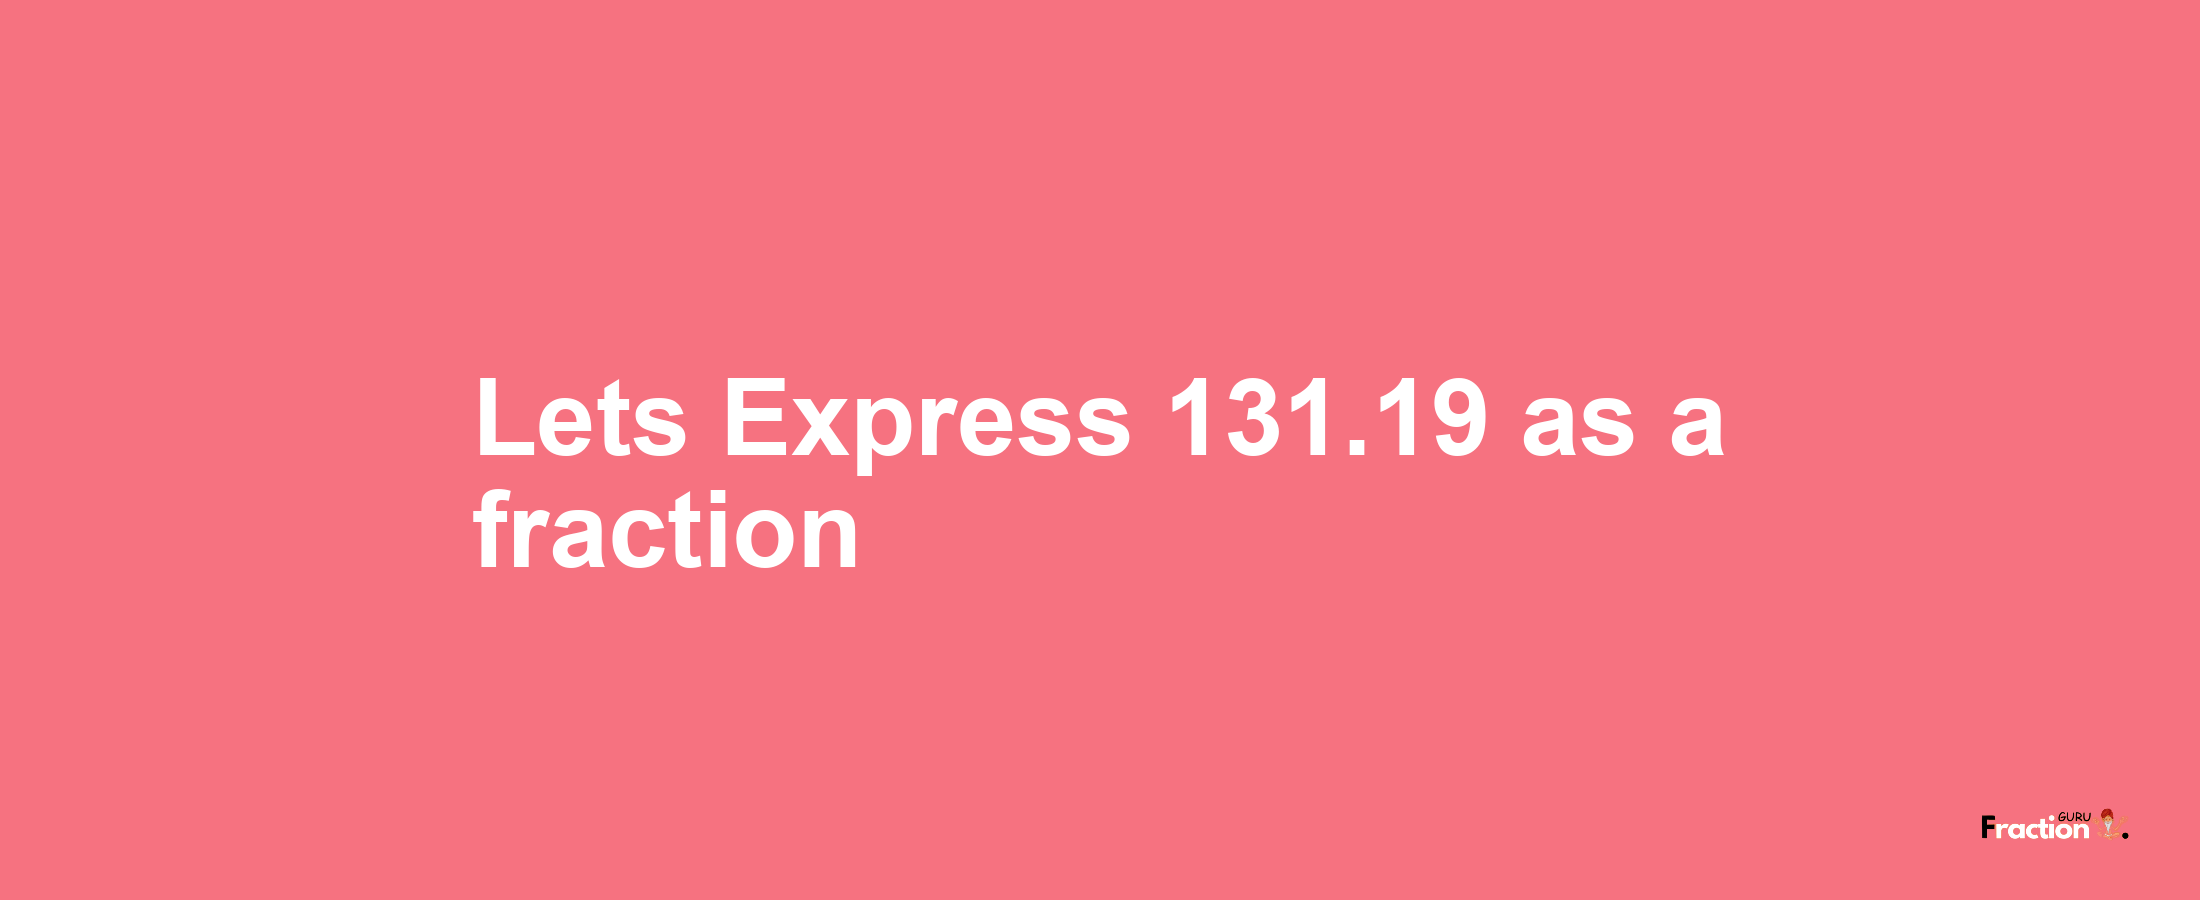 Lets Express 131.19 as afraction